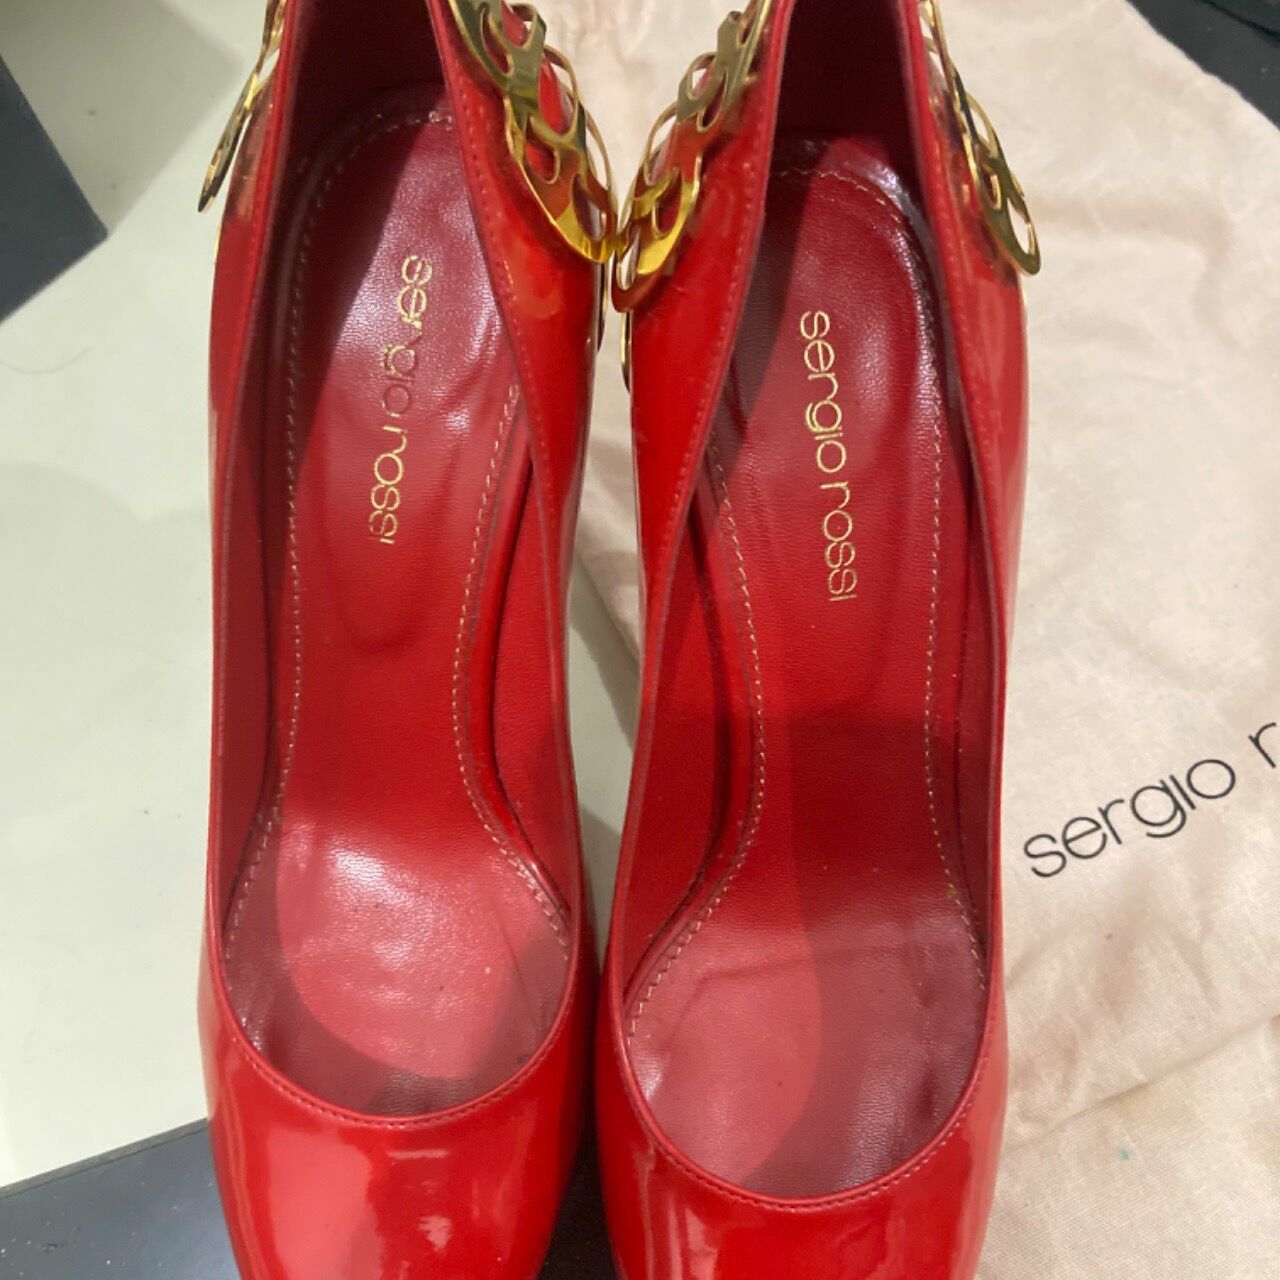 Sergio Rossi Gold & Red Heels